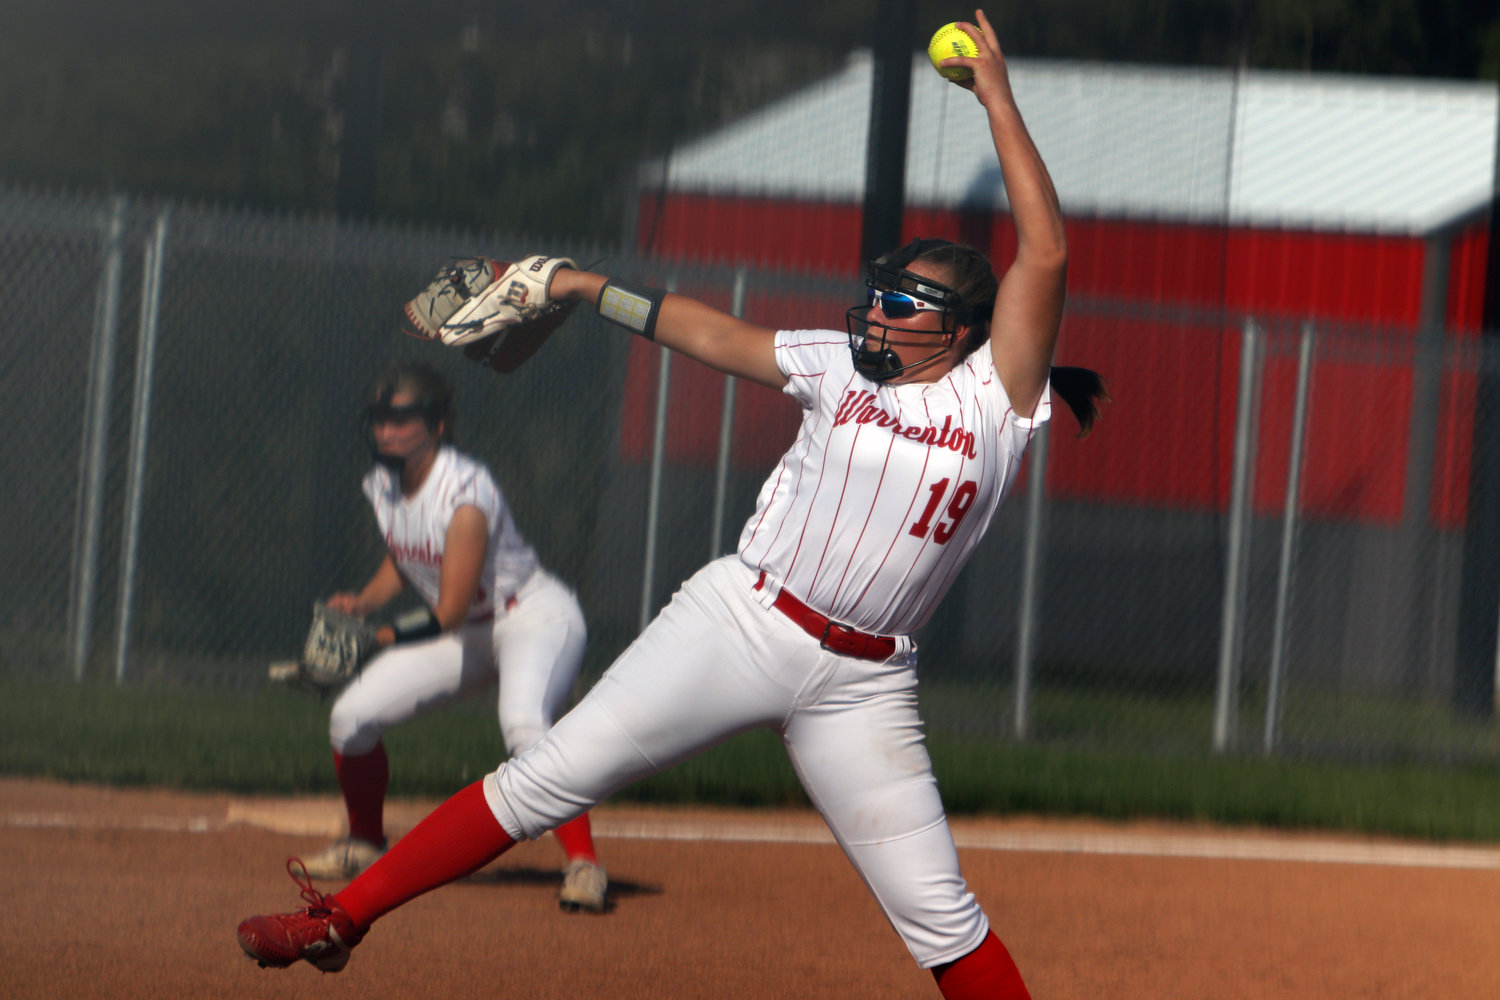 Kylie Witthaus delivers a pitch during a game against Orchard Farm earlier this season.